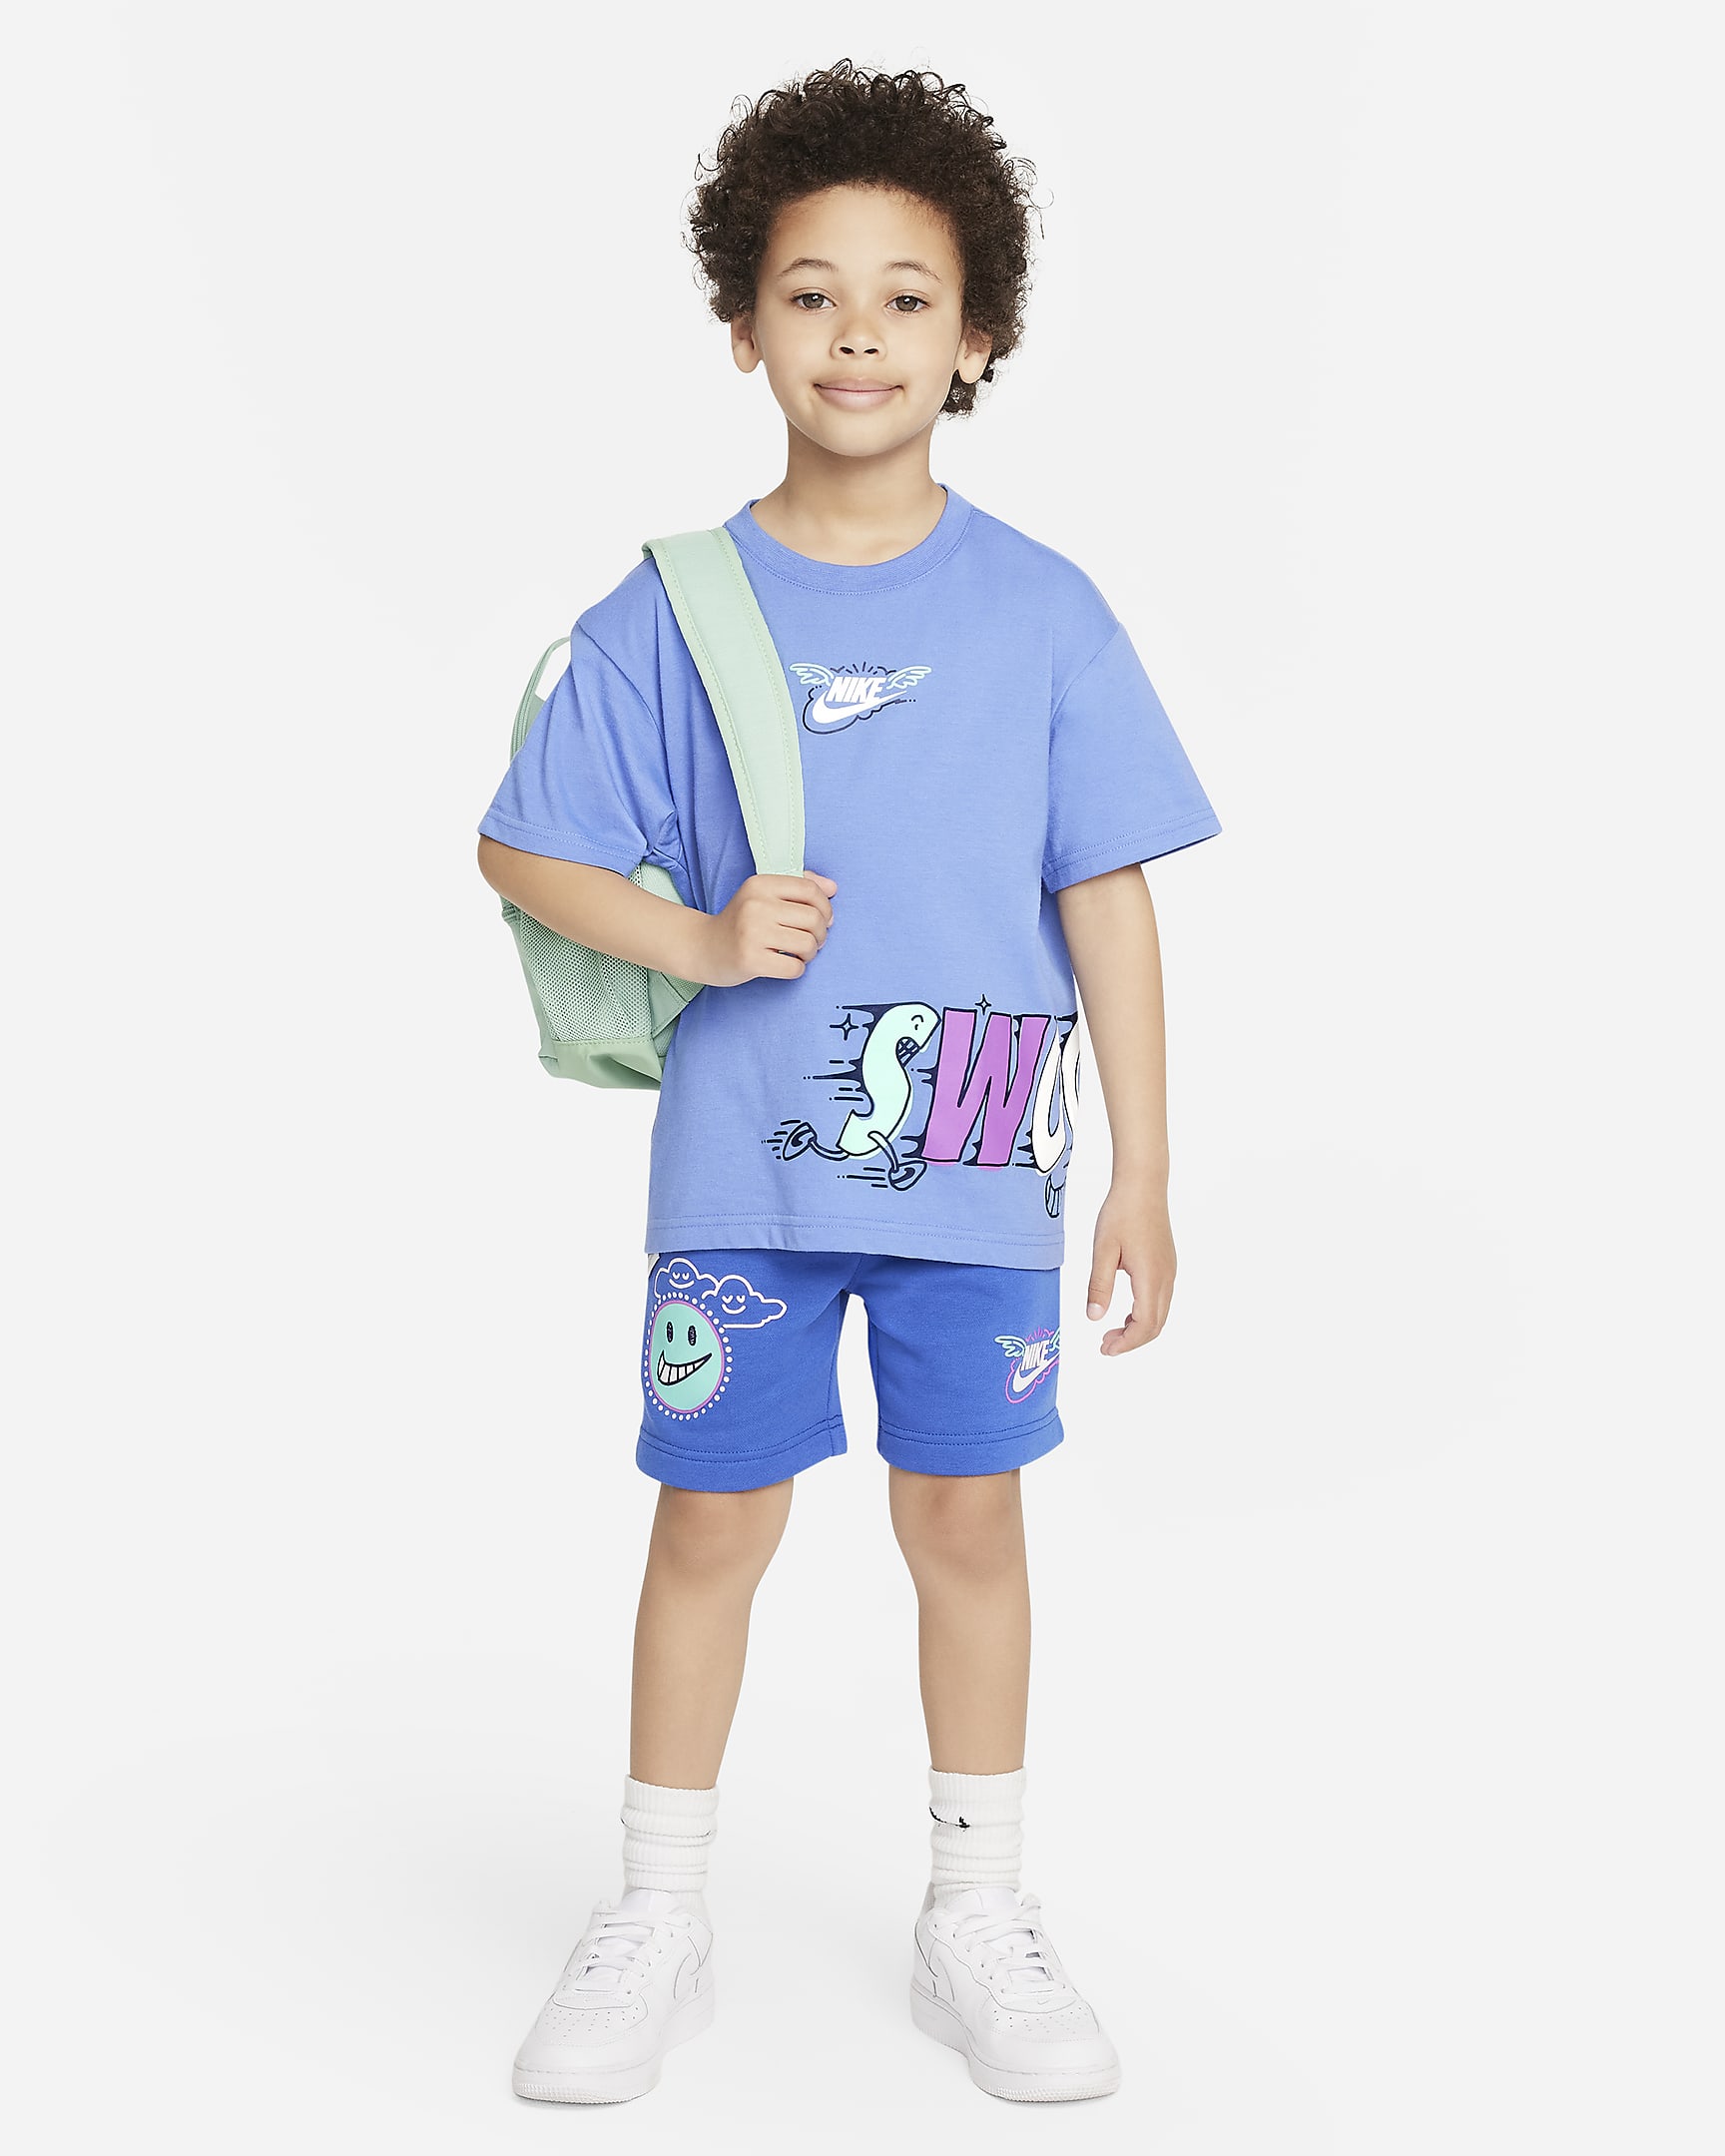 Nike Sportswear 'Art of Play' Relaxed Graphic Tee Younger Kids' T-Shirt ...